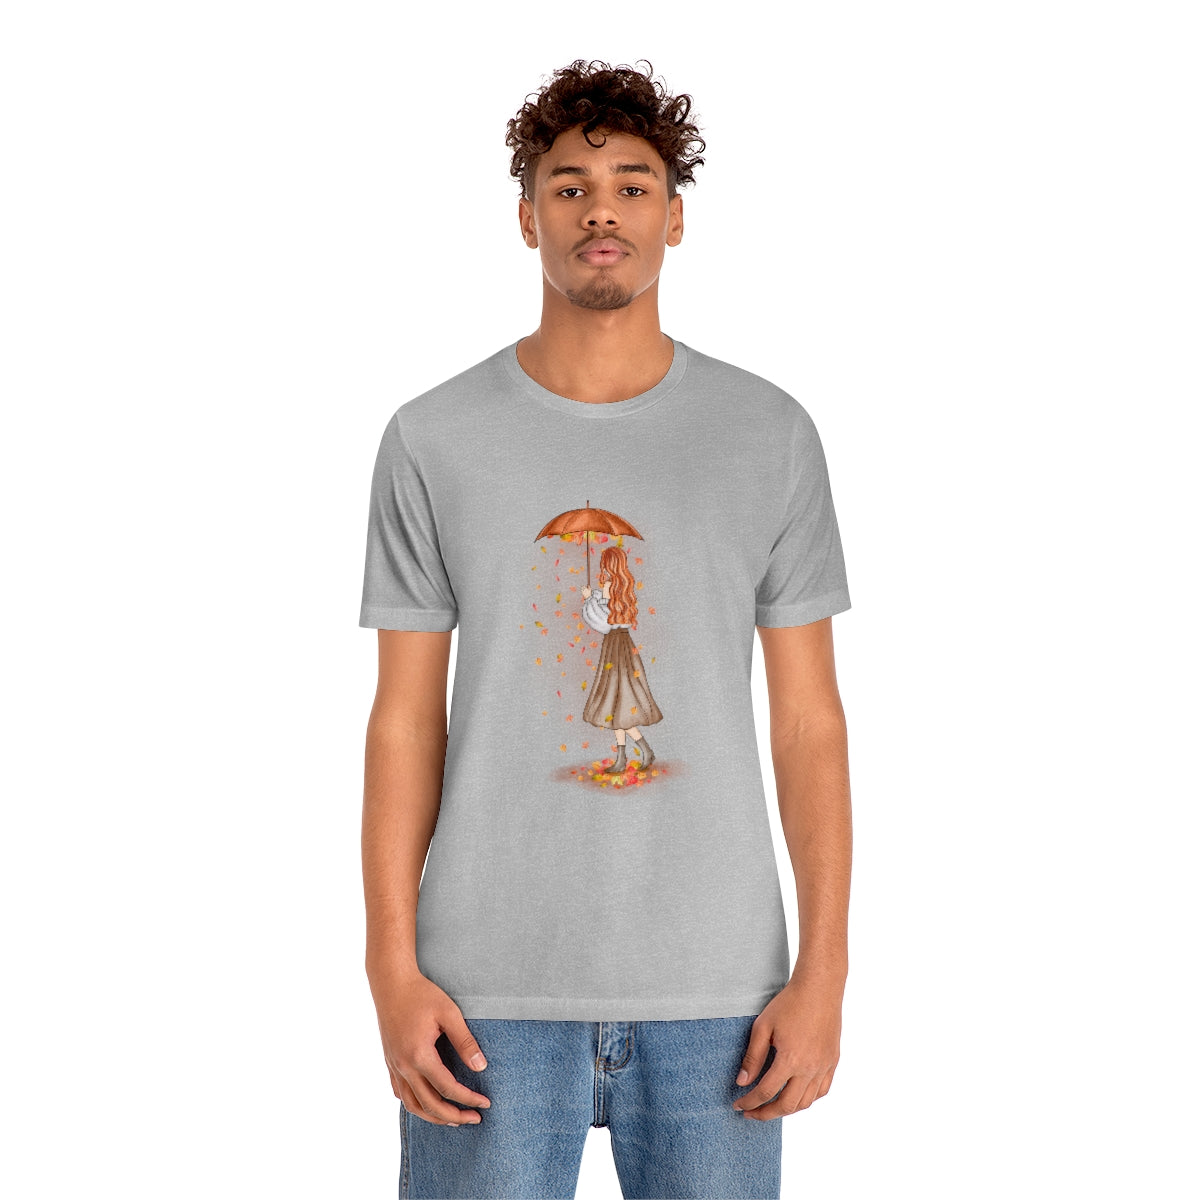 I Carry Fall with Me Unisex Jersey Short Sleeve Tee S-3XL